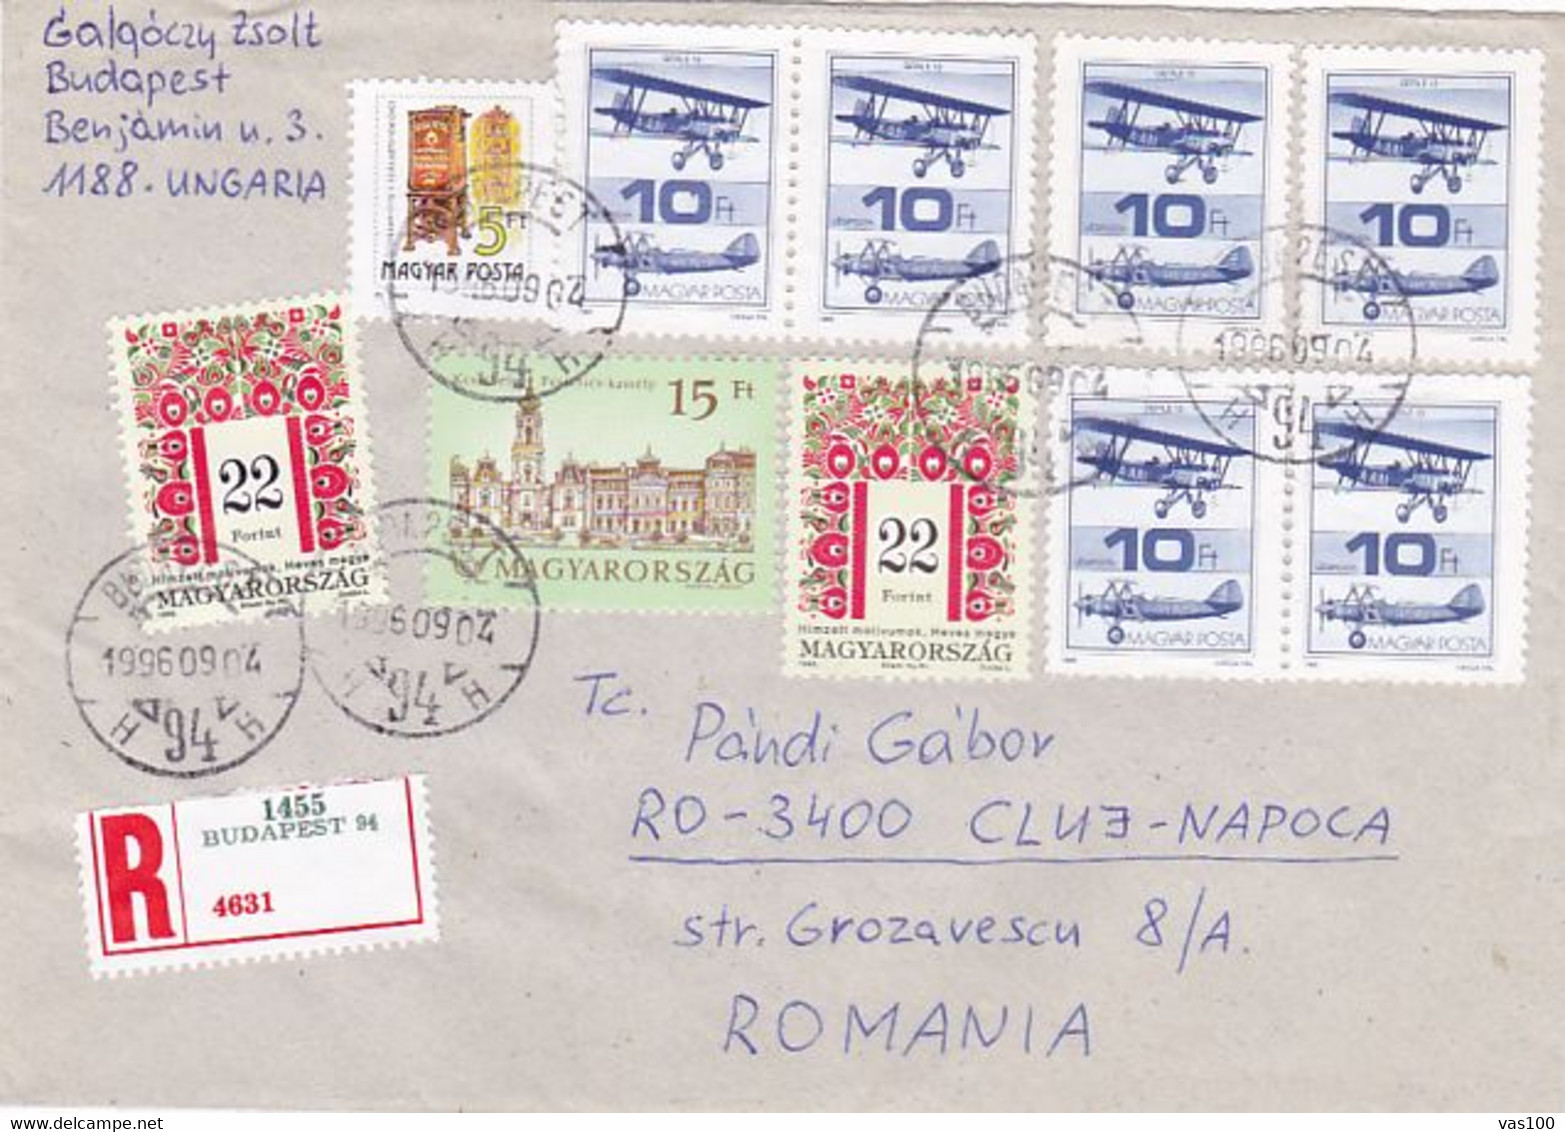 FOLKLORE ART, MACHINE CABINET, CASTLE, PLANE STAMPS ON REGISTERED COVER, 1996, HUNGARY - Covers & Documents